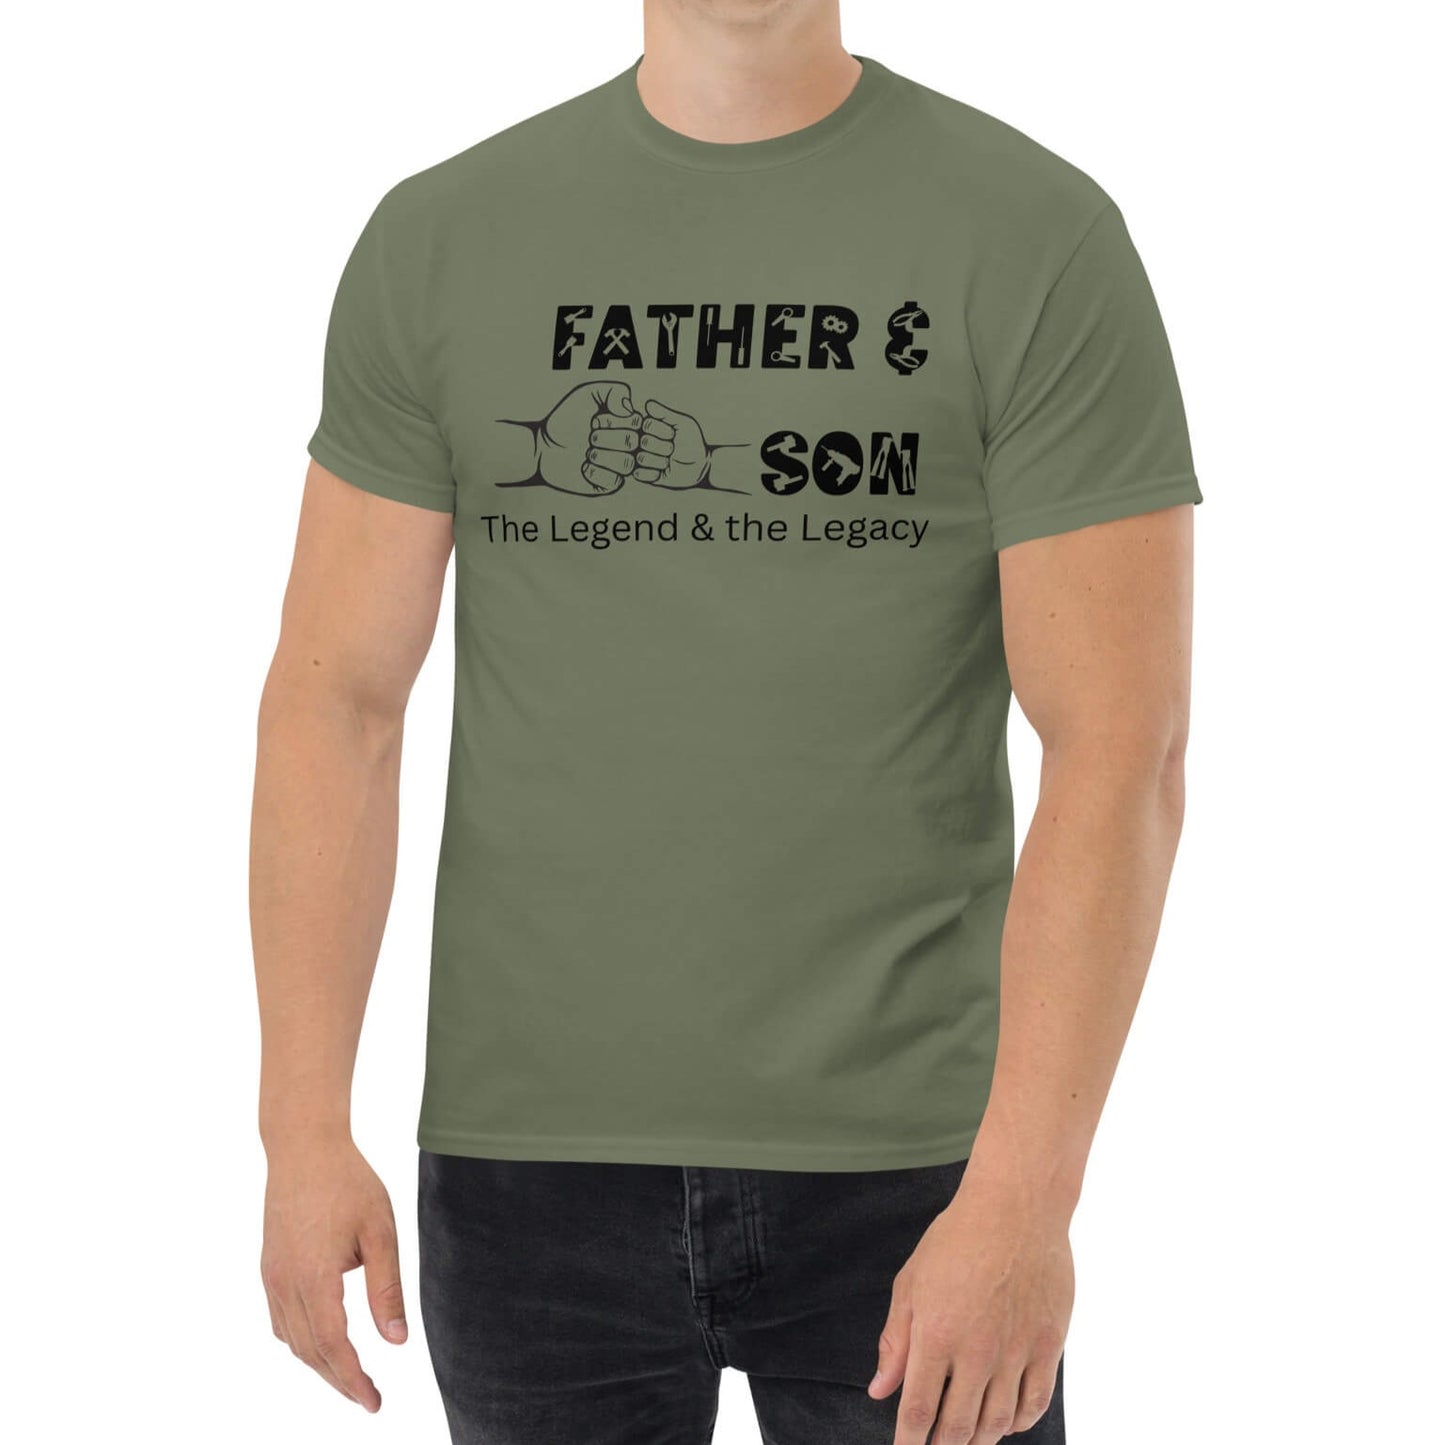 son gift shirt to day on birthday and fathers day